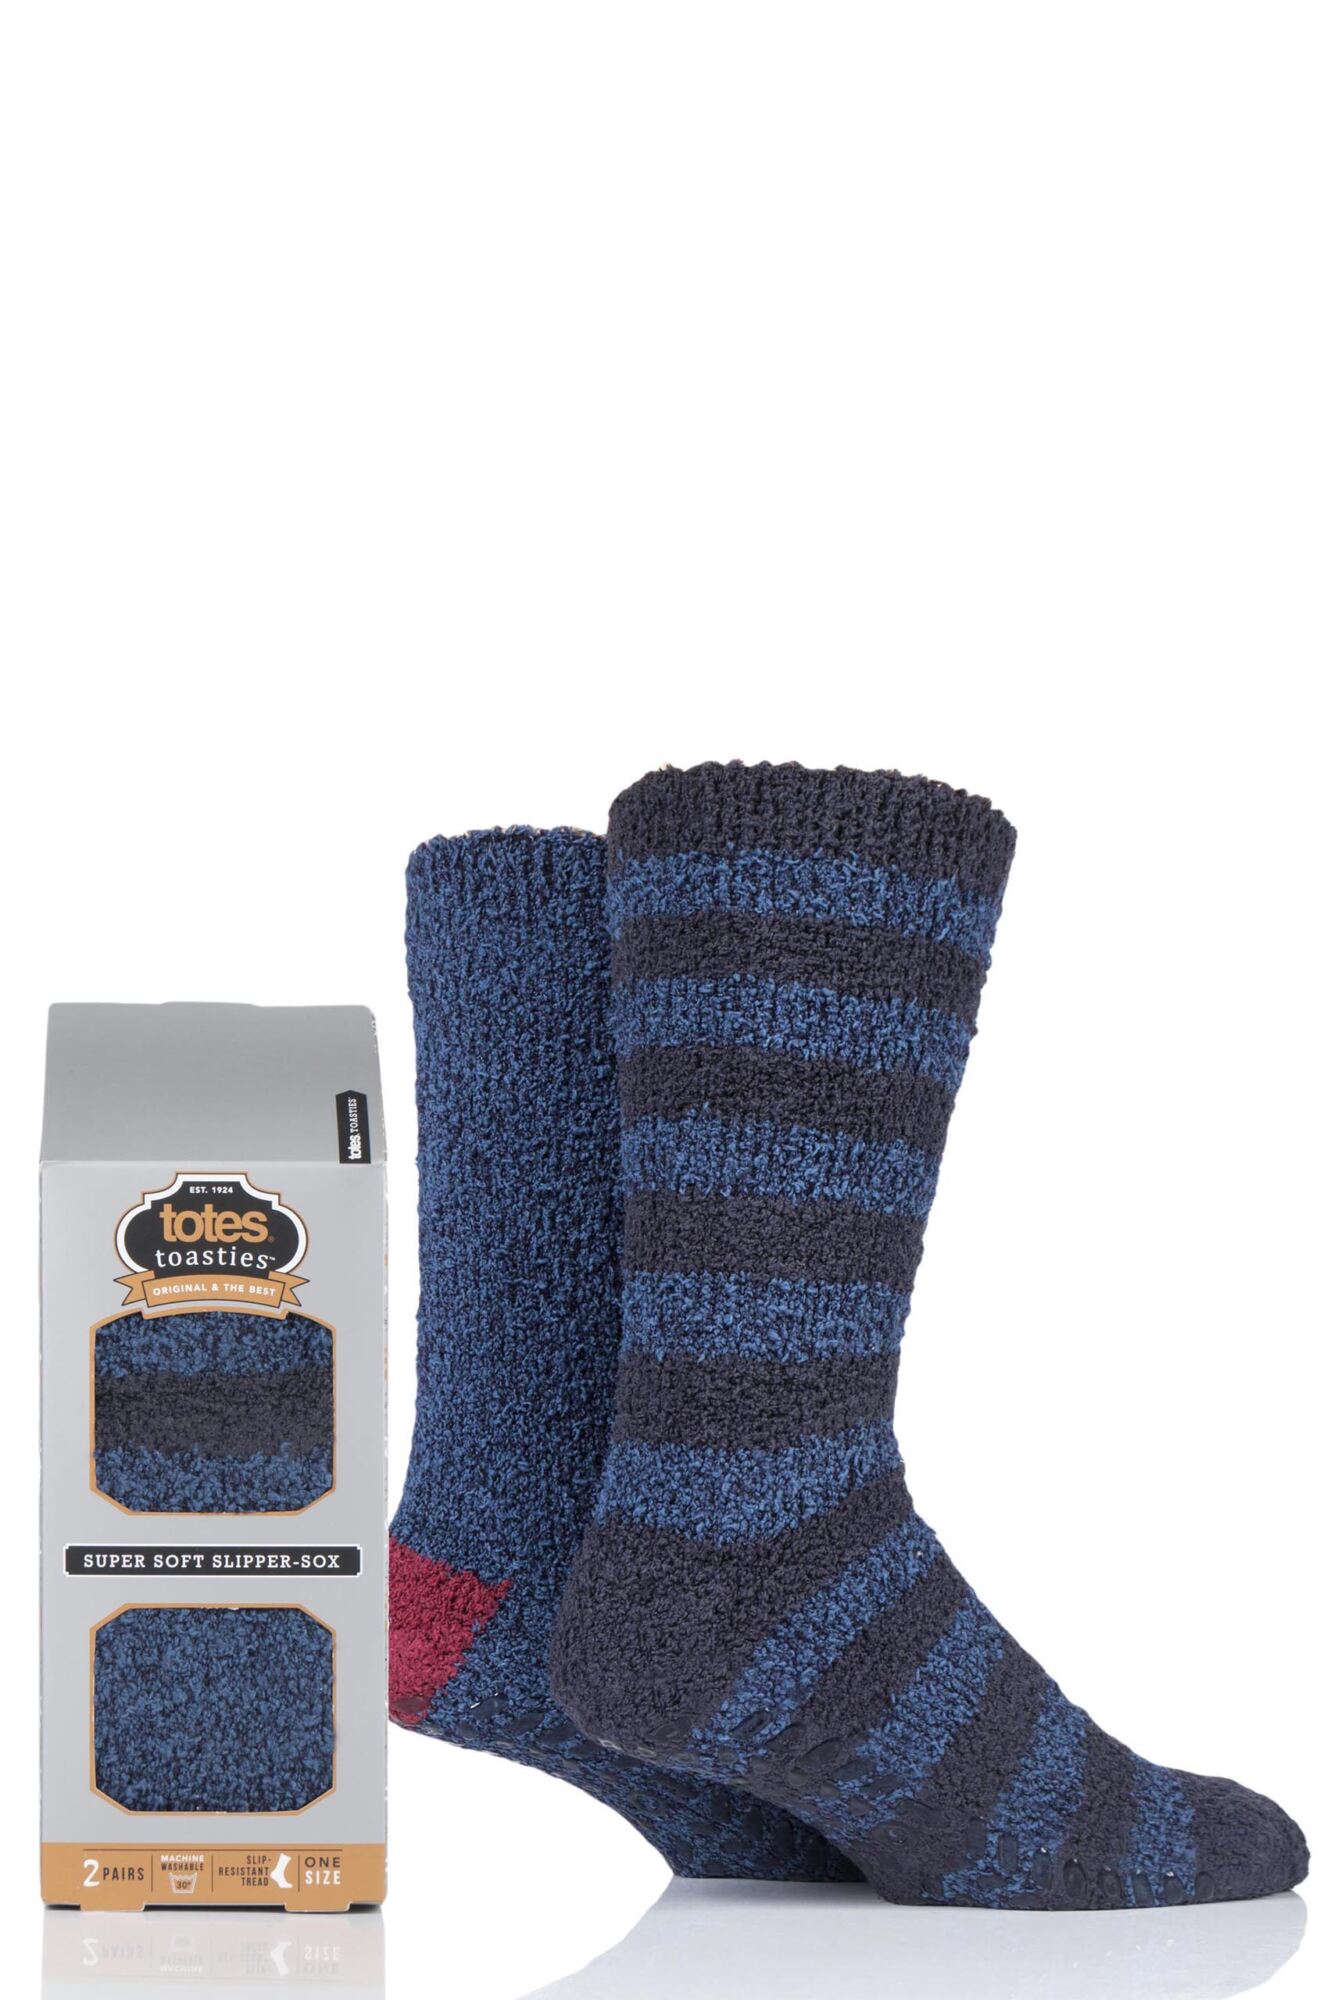 2 Pair Twin Super Soft Stripe and Plain Bed Socks Men's - Totes